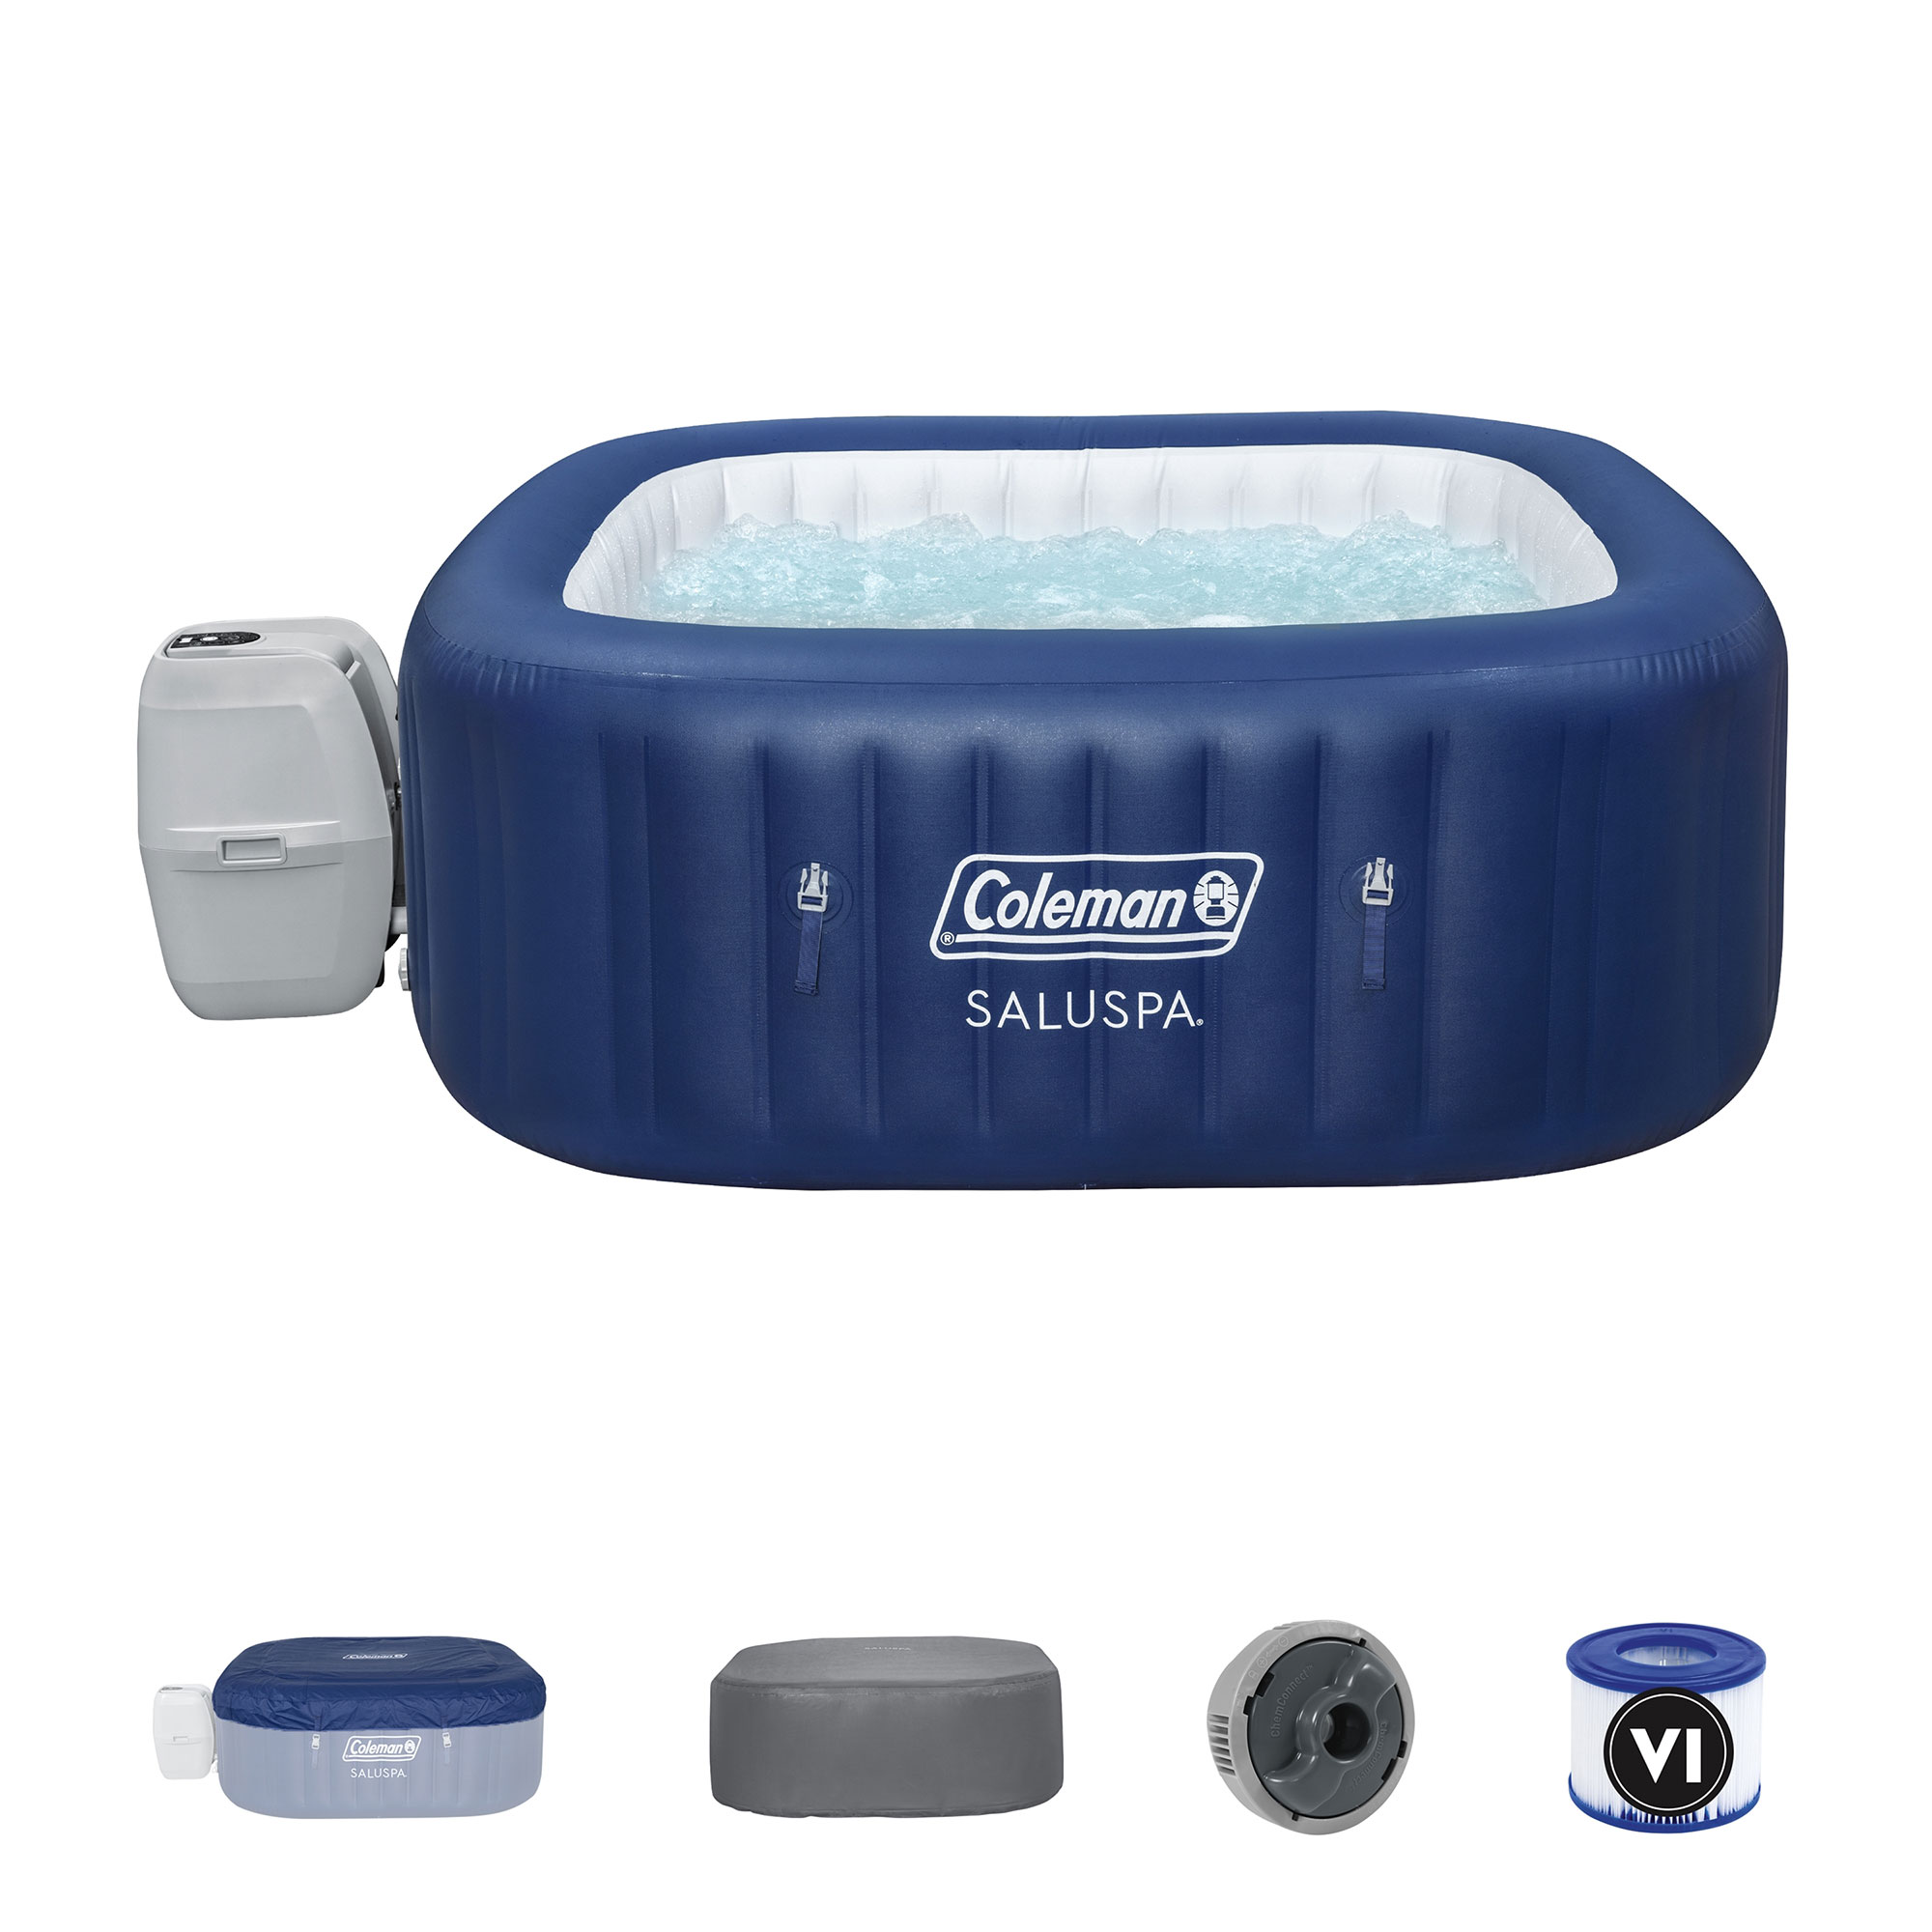 Coleman SaluSpa Atlantis AirJet Inflatable Hot Tub with 140 Soothing Jets - image 1 of 10